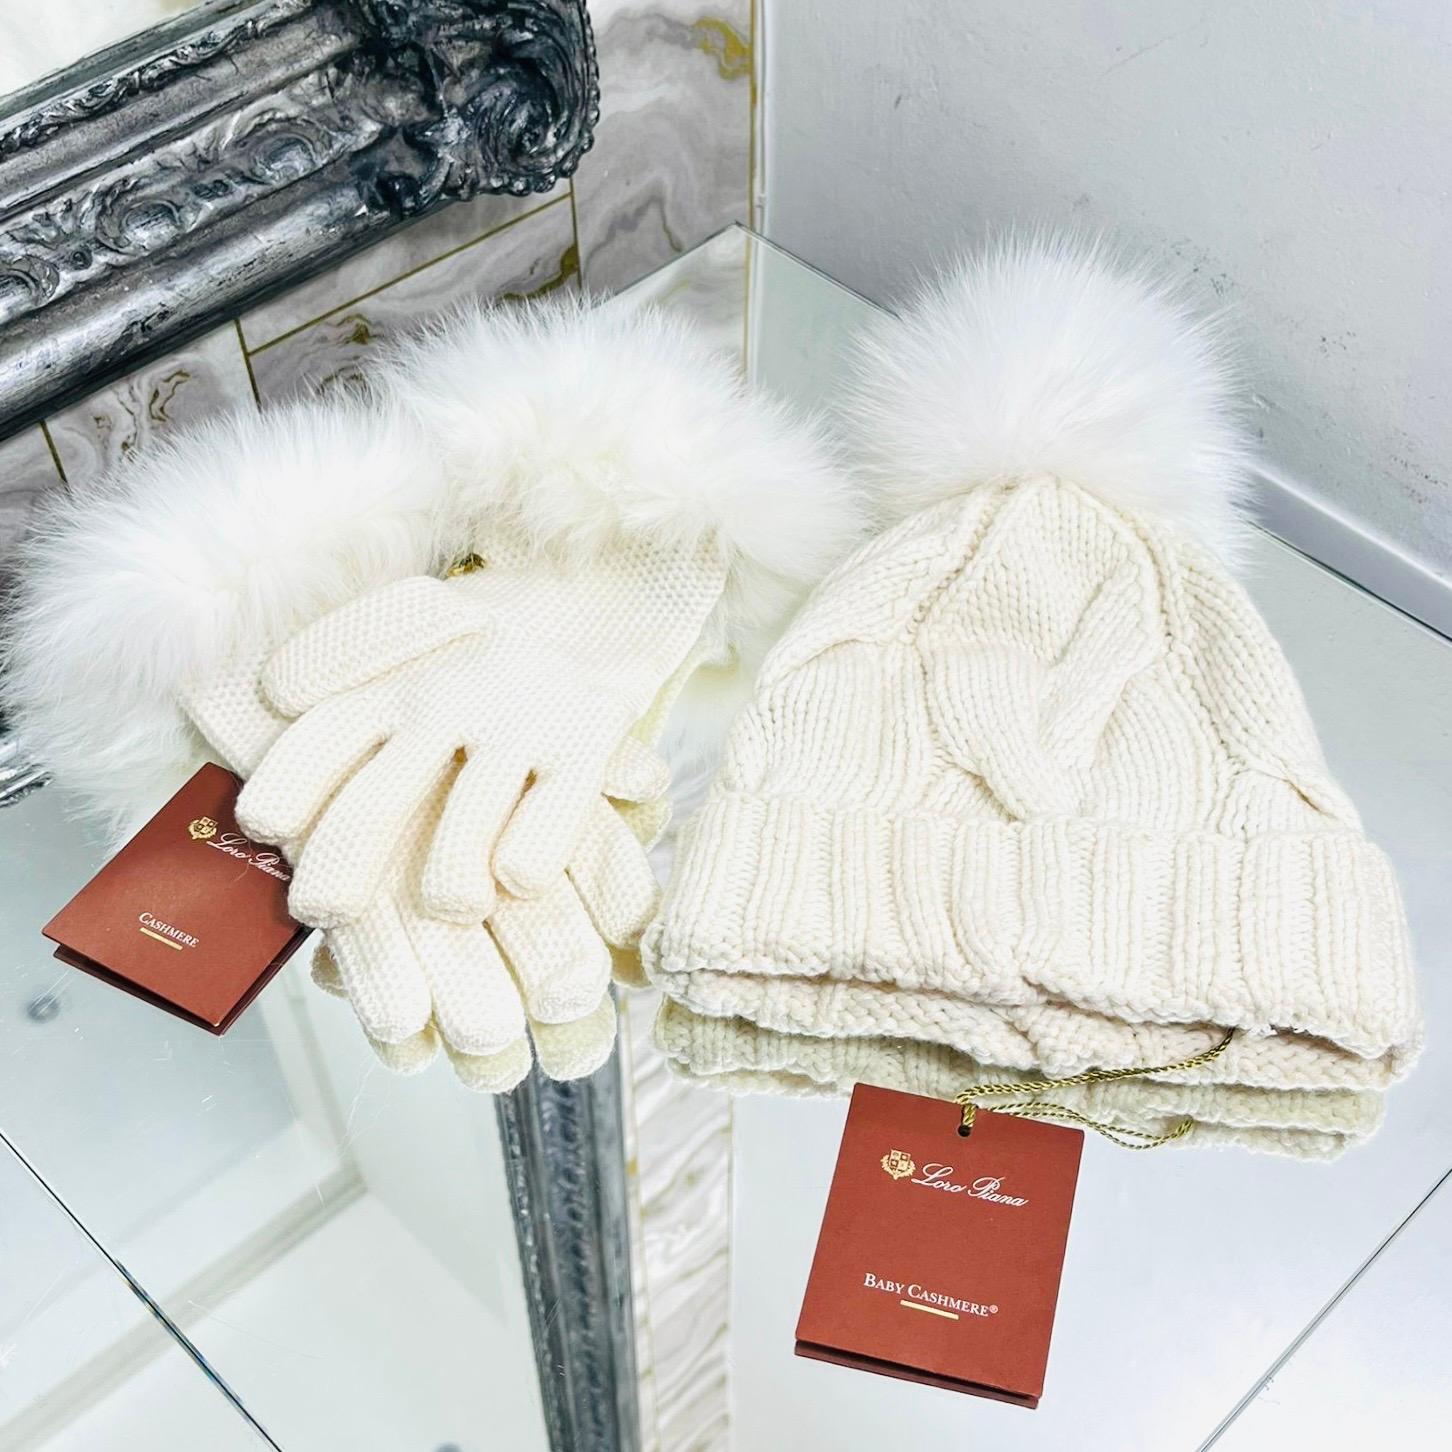 Brand New - Loro Piana Fox Fur & Cashmere Beanie & Gloves Set

Ivory set consisting of cable knit beanie and crochet styled gloves.

Finished with fluffy white dyed fox pom pom and trim detail.

Gloves featuring gunmetal ring with 'Loro Piana'